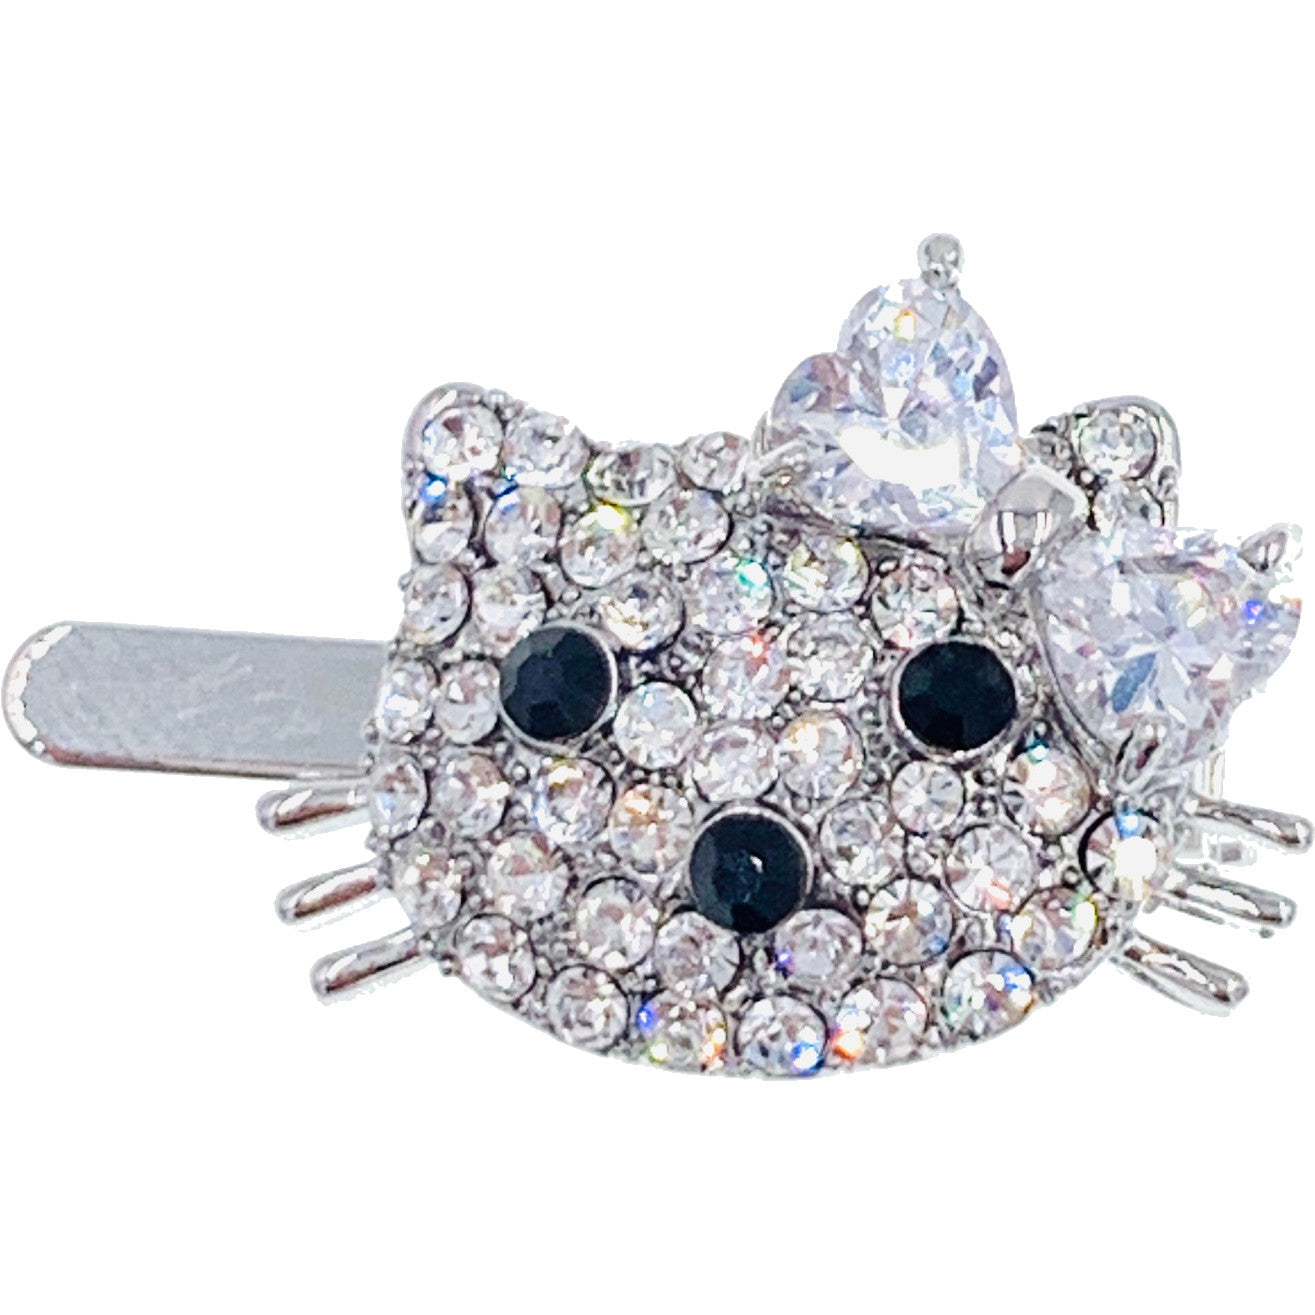 KITTY Magnetic Hair Clip use Swarovski ELM & Cubic Zirconia Crystals Hairpin Barrette Cats, Magnetic Clip - MOGHANT